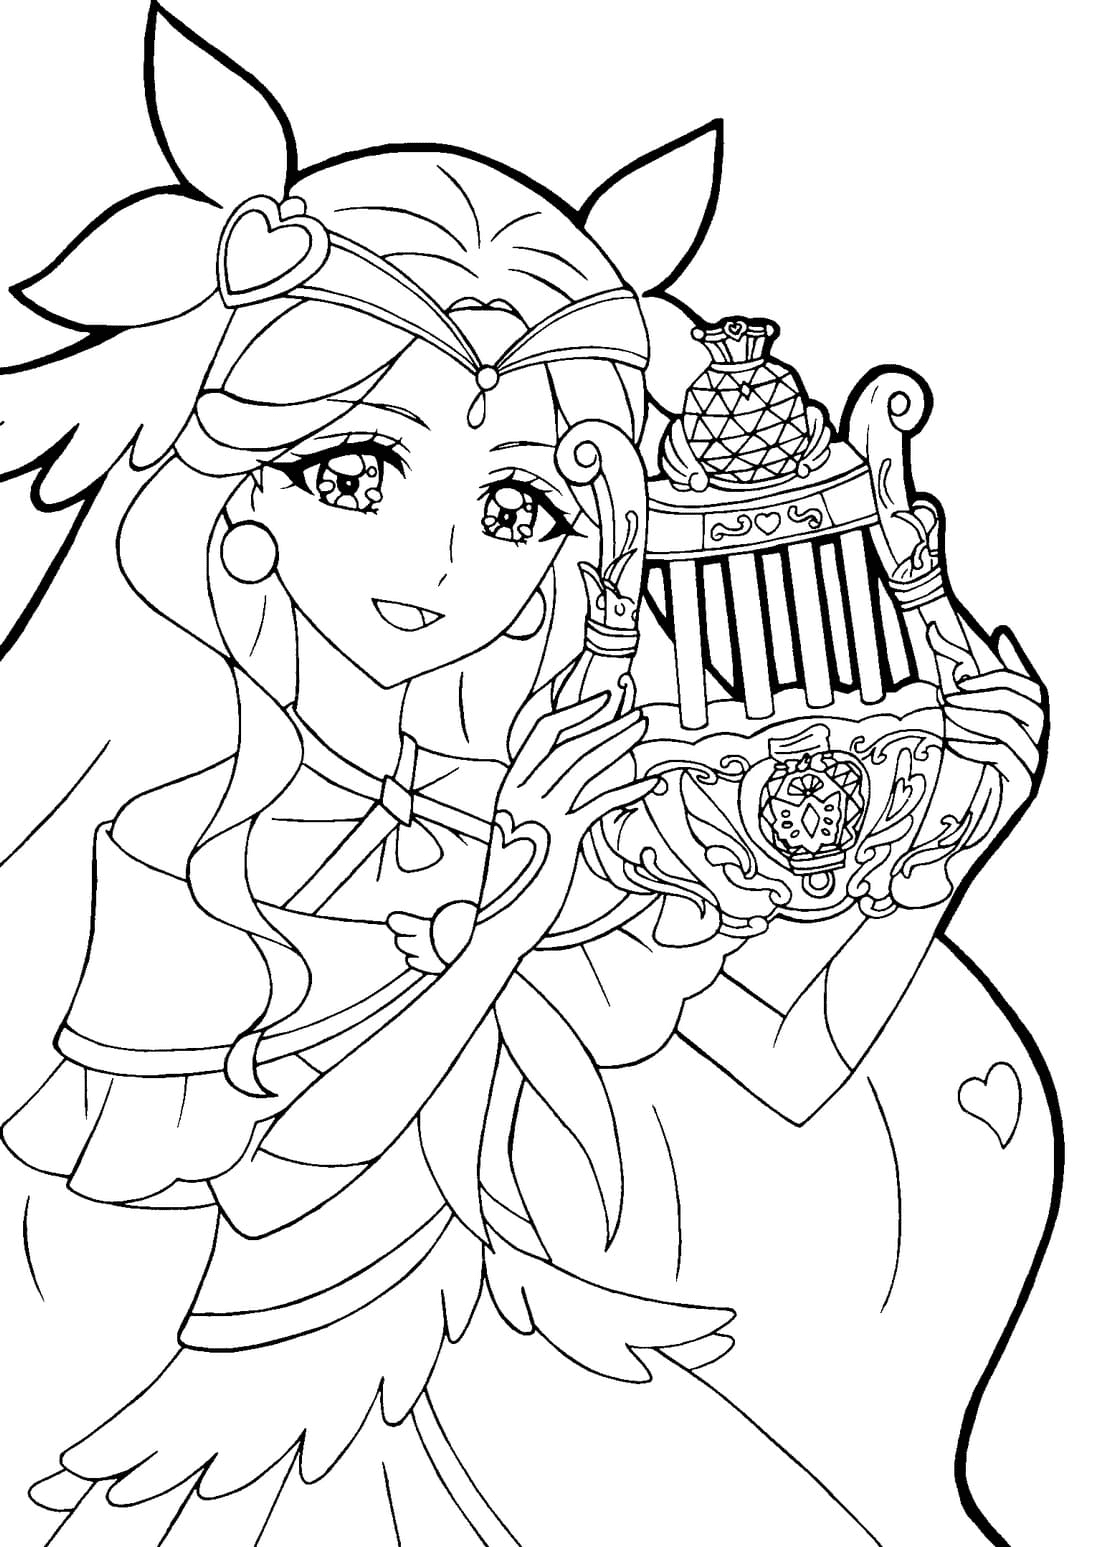 Adorable Girl Coloring Pages   Anime Coloring Pages   Coloring ...